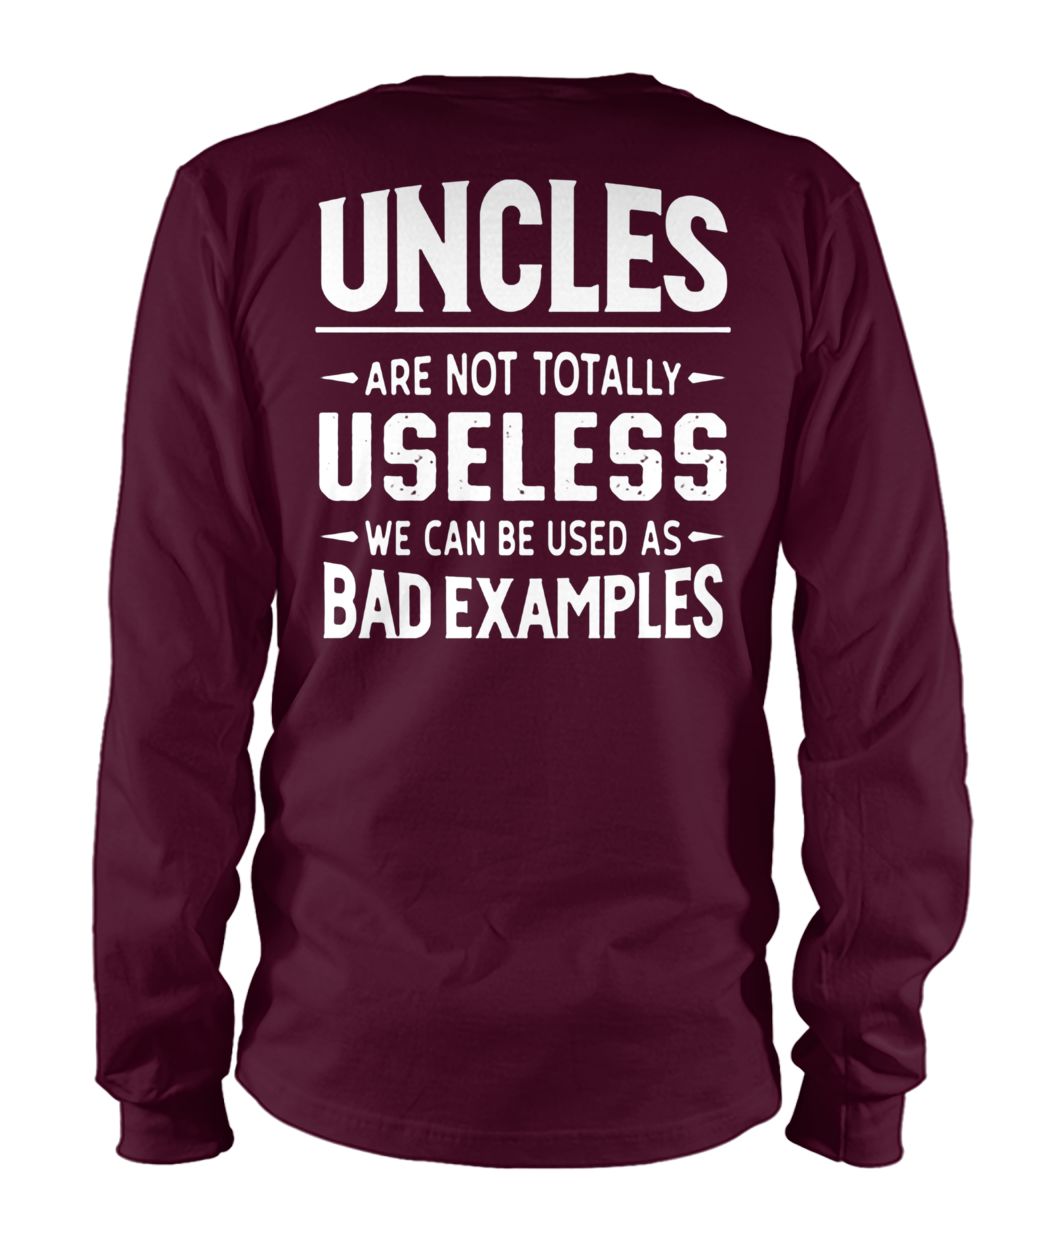 Uncles are not totally useless we can be used as bad examples unisex long sleeve